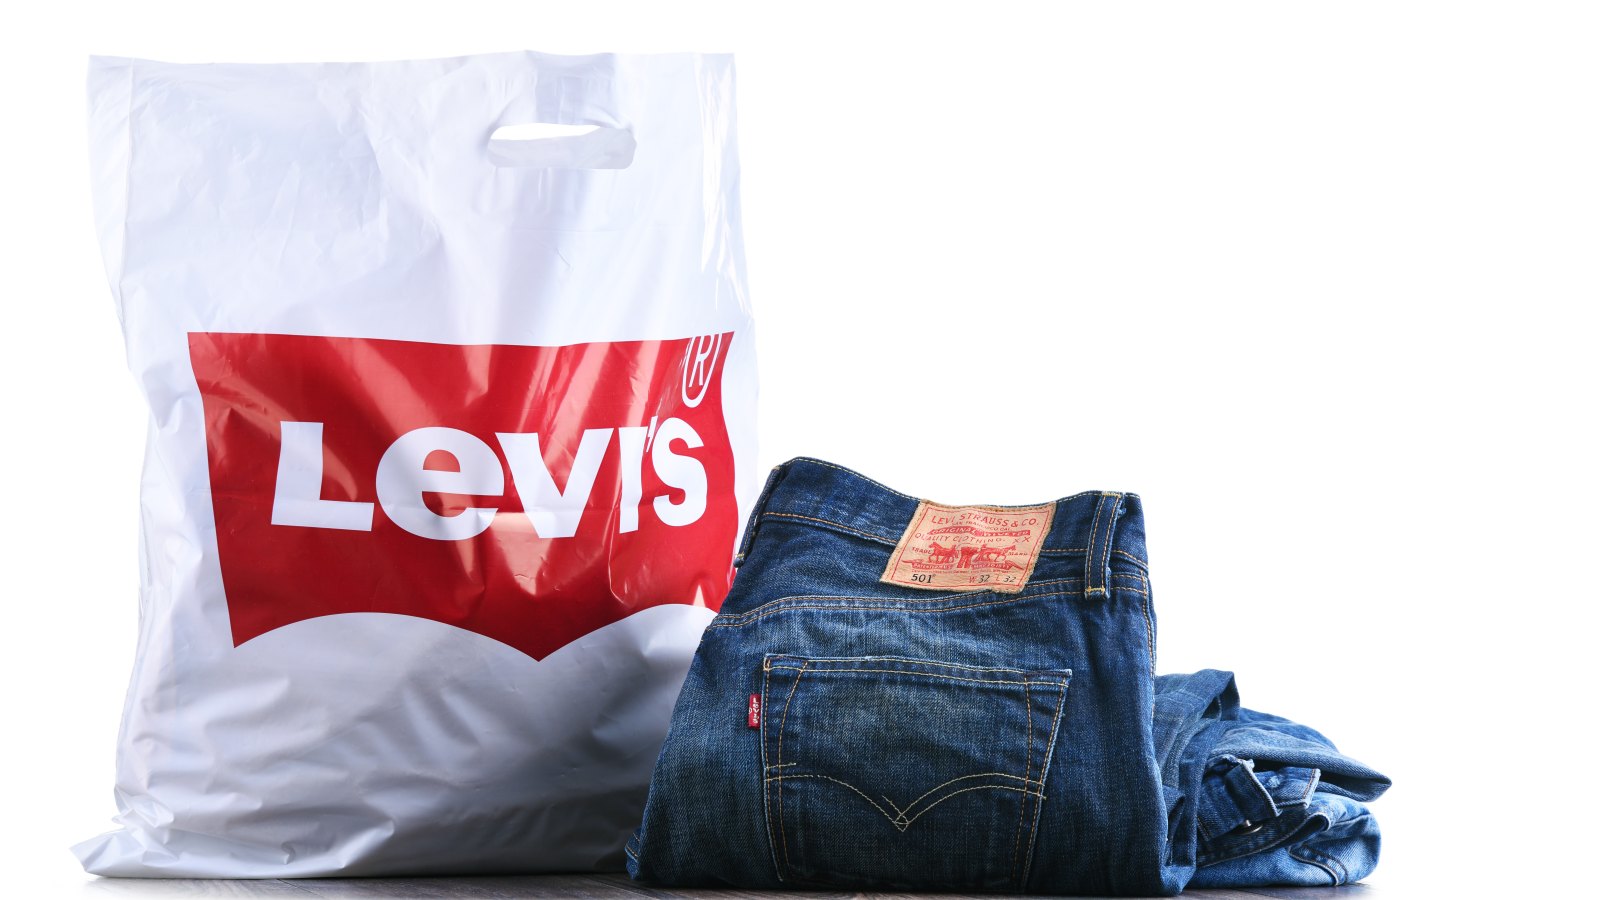 Levi's Shopping Bag and Jeans